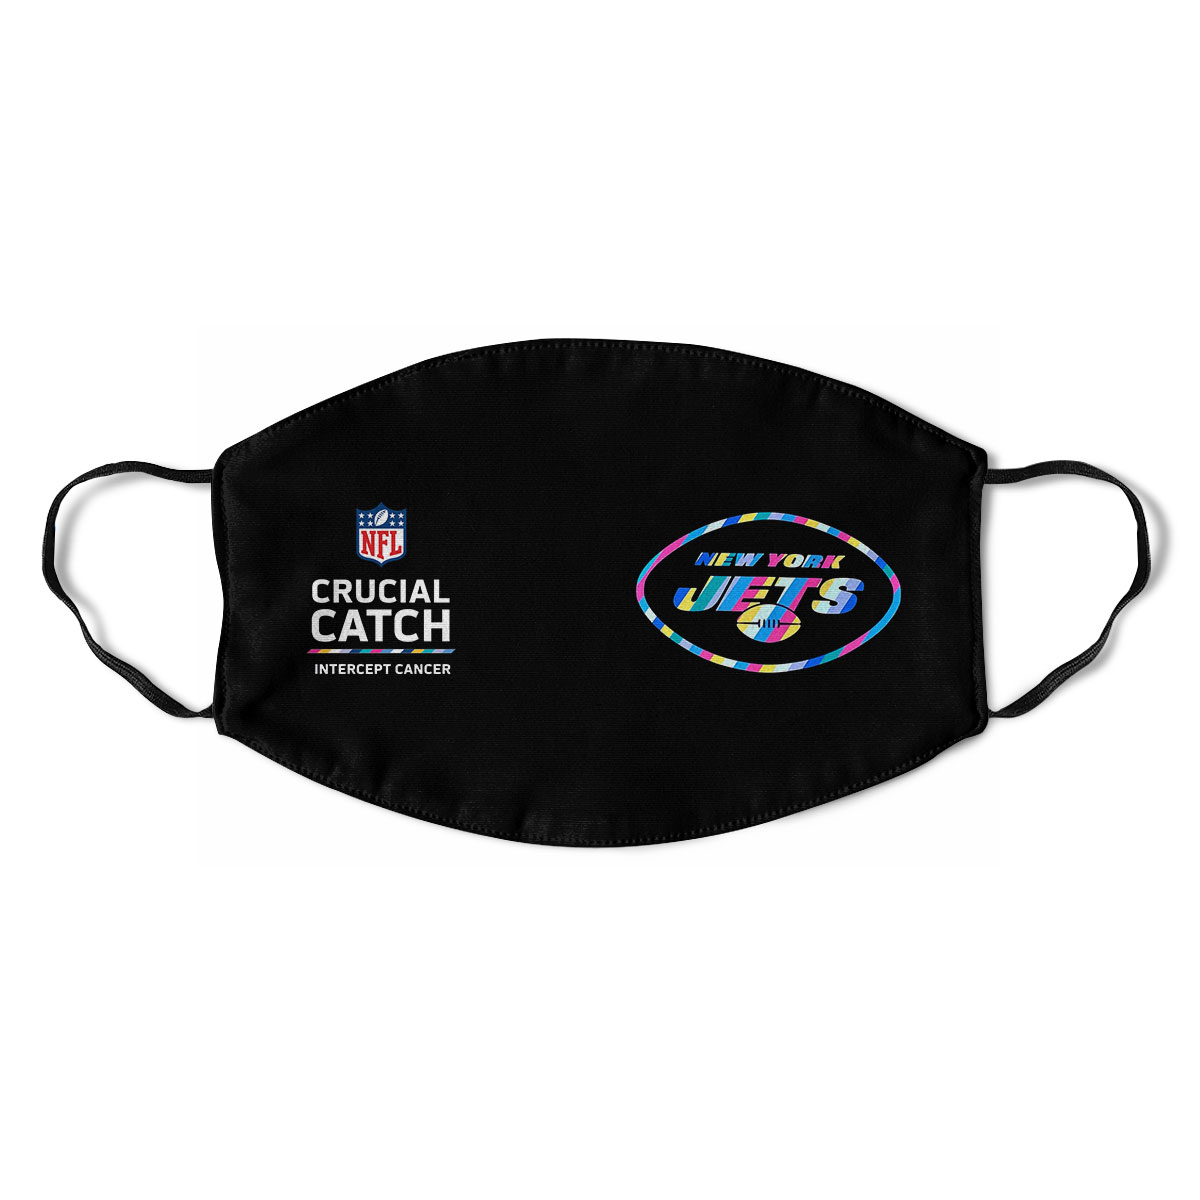 New York Jets Nfl Crucial Catch Multicolor Face Mask Cloth Reusable